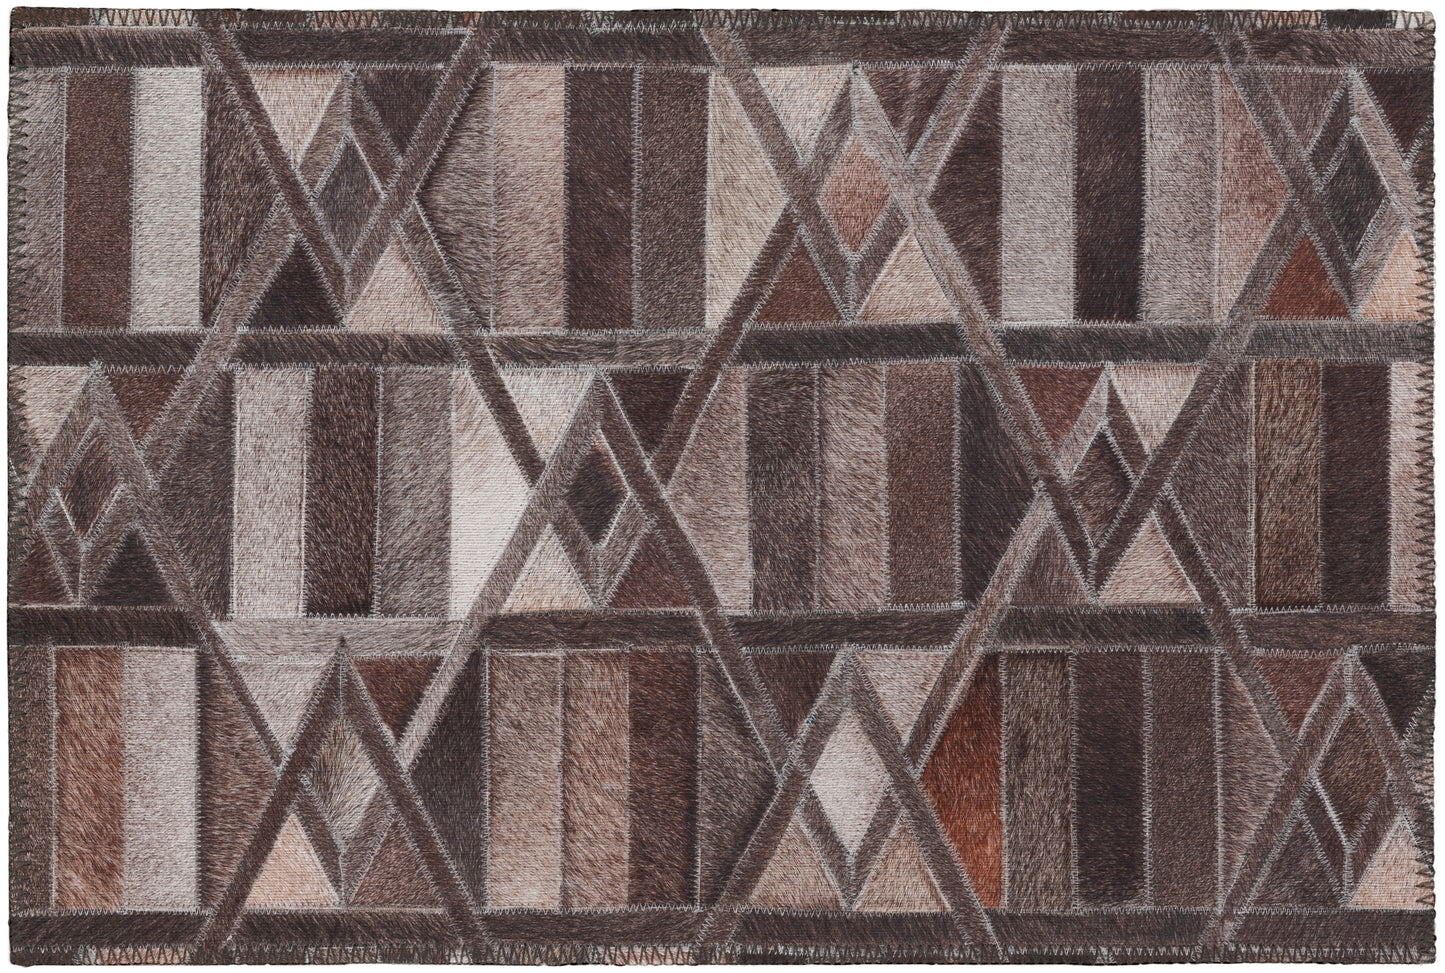 Stetson SS4 Machine Made Synthetic Blend Indoor Area Rug by Dalyn Rugs